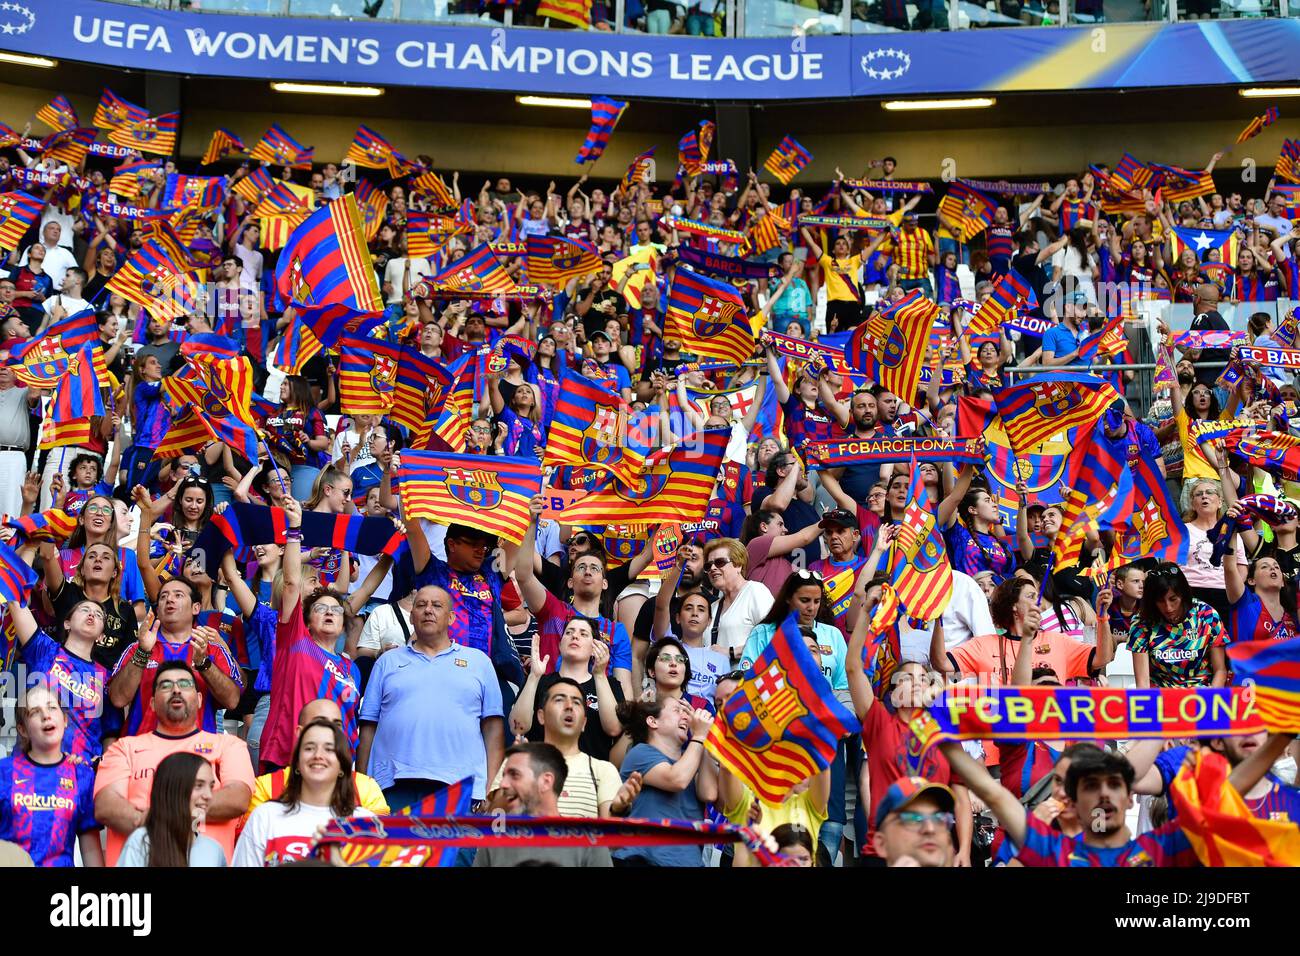 Turin, Italy. 21st, May 2022. Football fans of FC Barcelona seen on the stands during the UEFA Women’s Champions League final between Barcelona and Olympique Lyon at Juventus Stadium in Turin. (Photo credit: Gonzales Photo - Tommaso Fimiano). Stock Photo